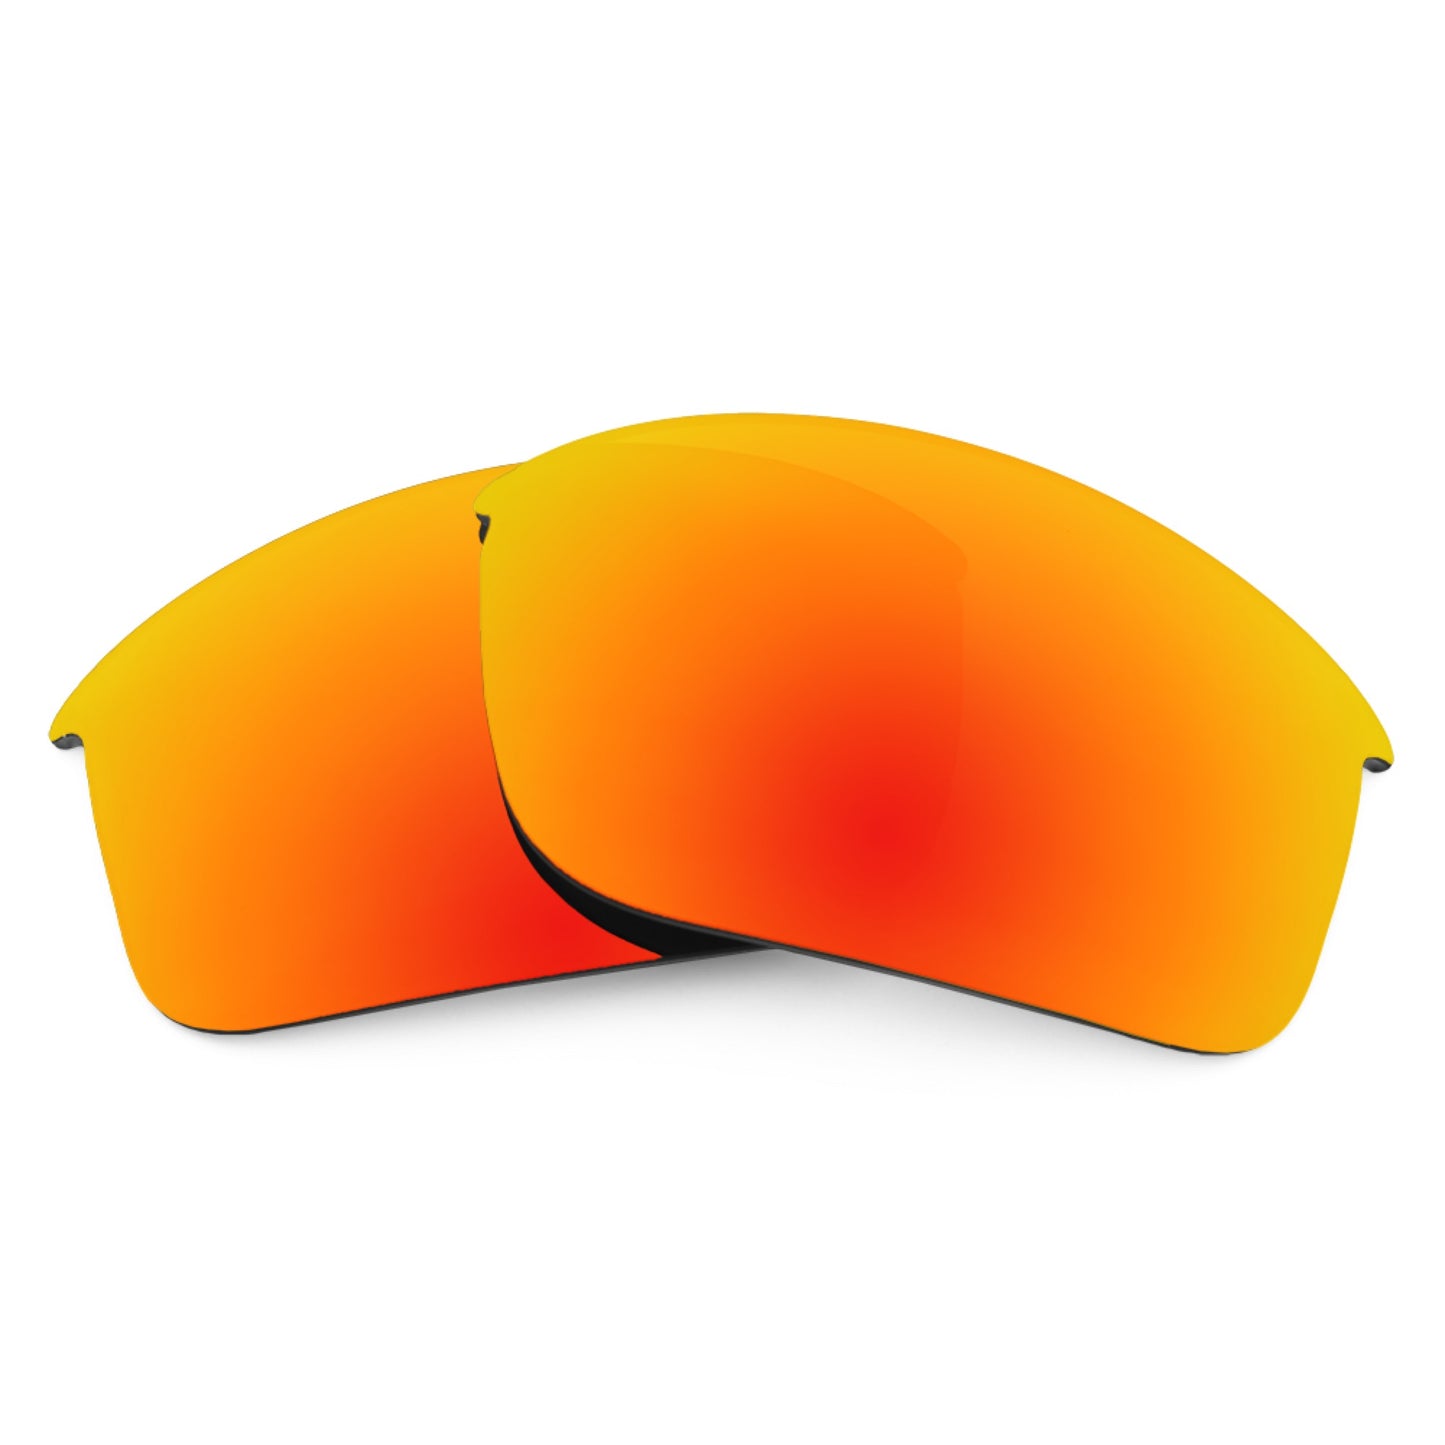 Revant replacement lenses for Nike Skylon Ace Non-Polarized Fire Red